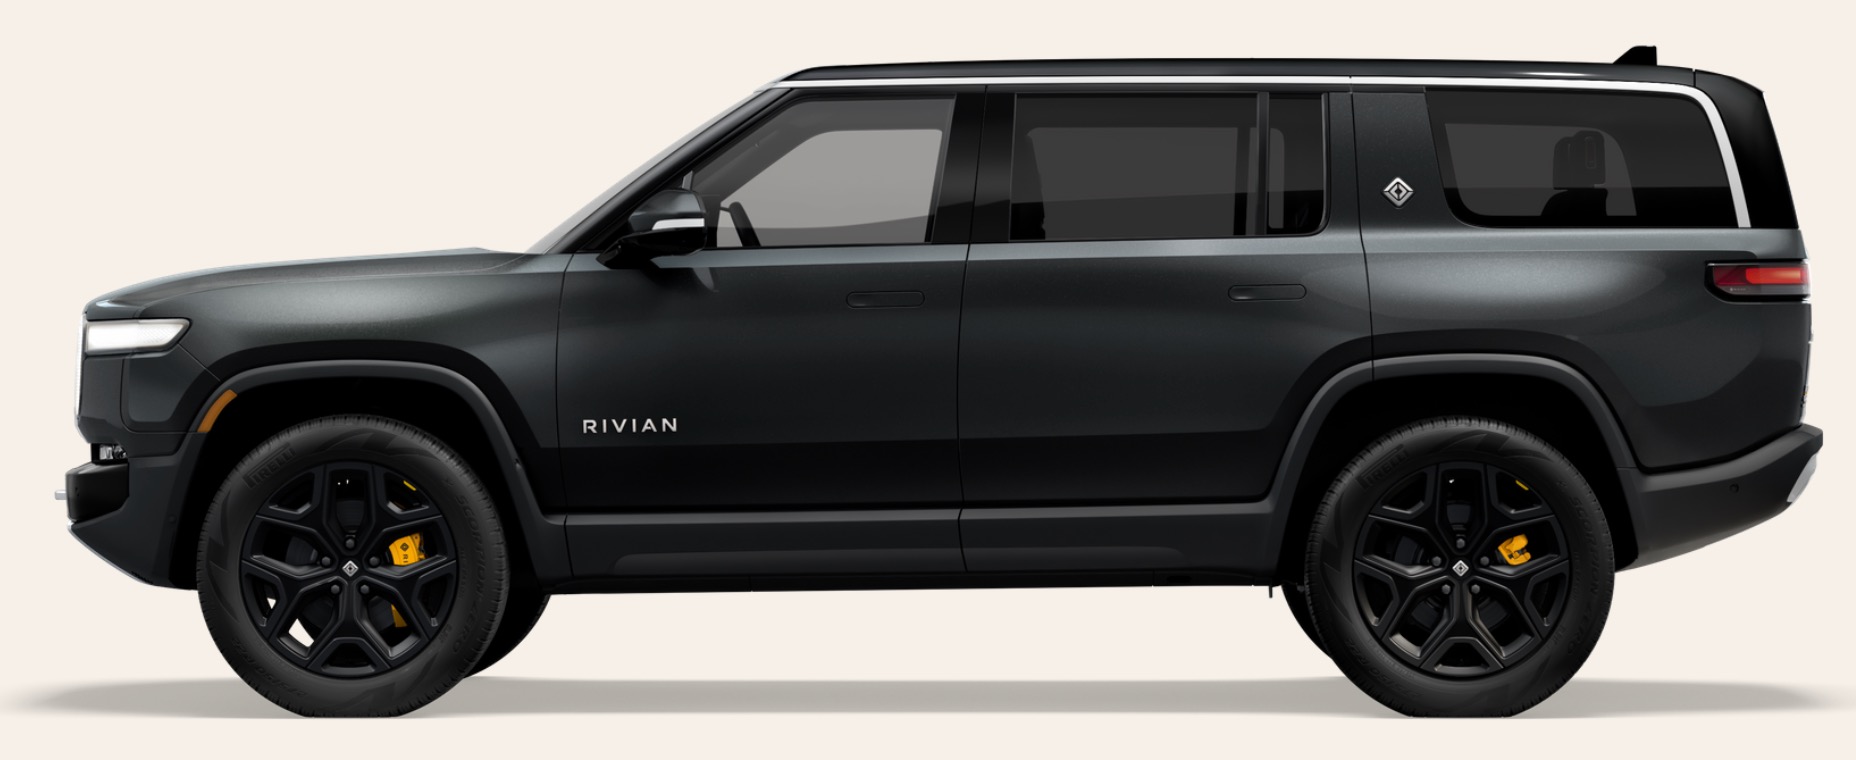 Rivian R1T R1S R1S Shop access live with lots of inventory! 5DC79AE2-8960-43FE-BED6-5A2AEE6163AD